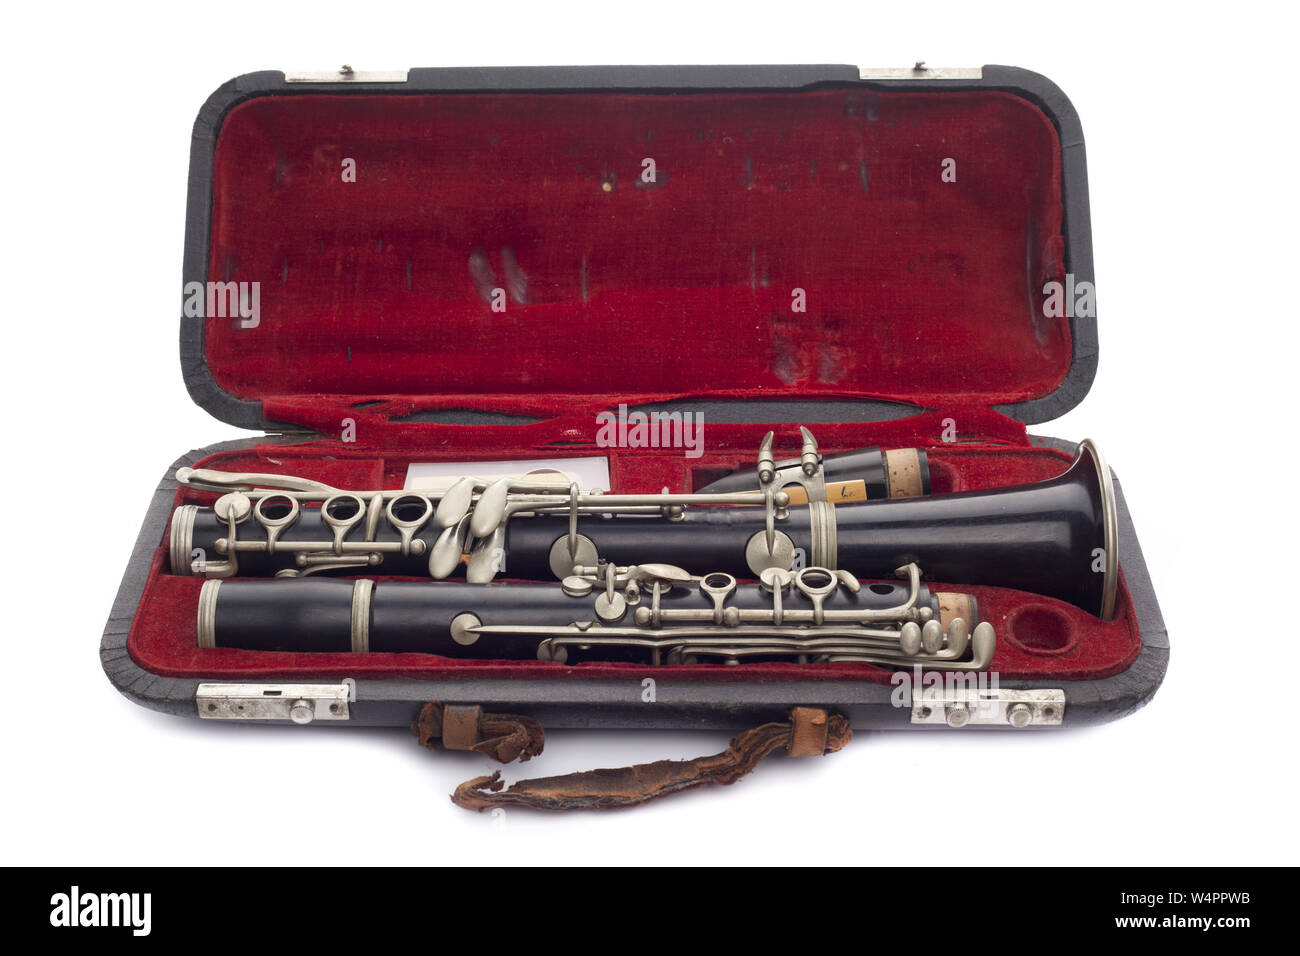 Antique Clarinet broken down in its travel case Isolated on white Stock Photo